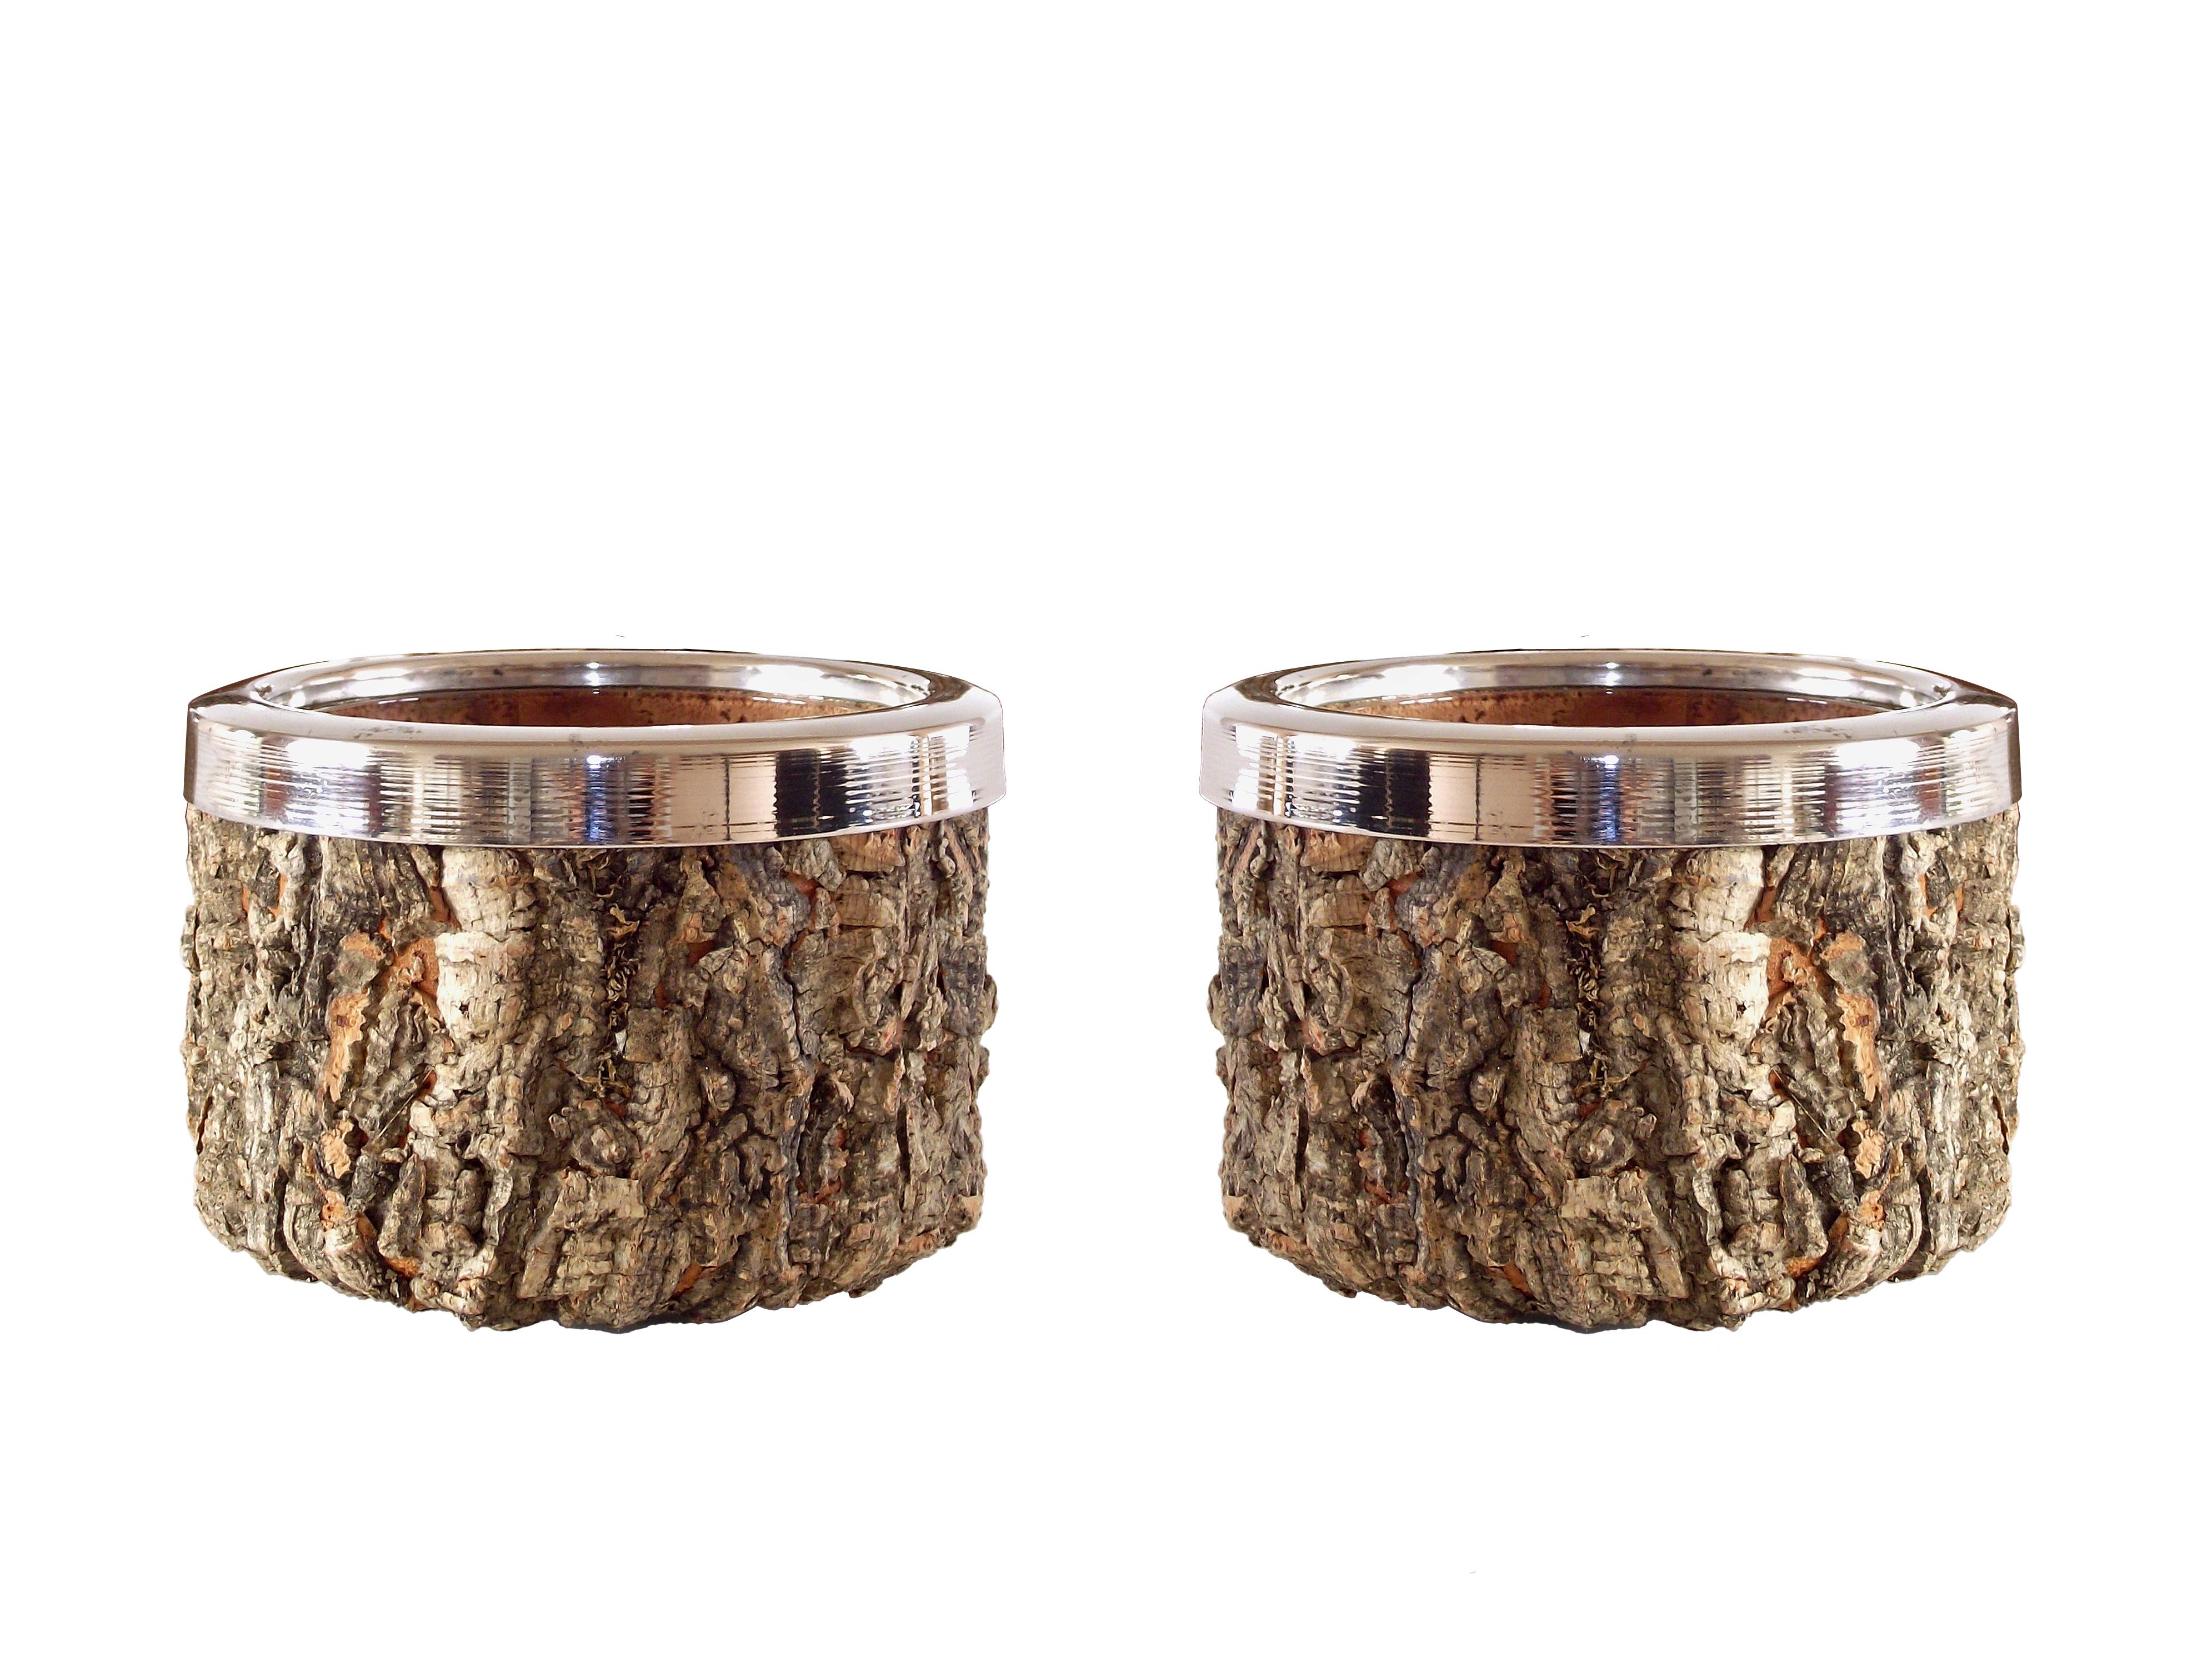 Italian Gabriella Crespi Pair of Cork and Chrome Bowls with Glass Inserts, 1970s